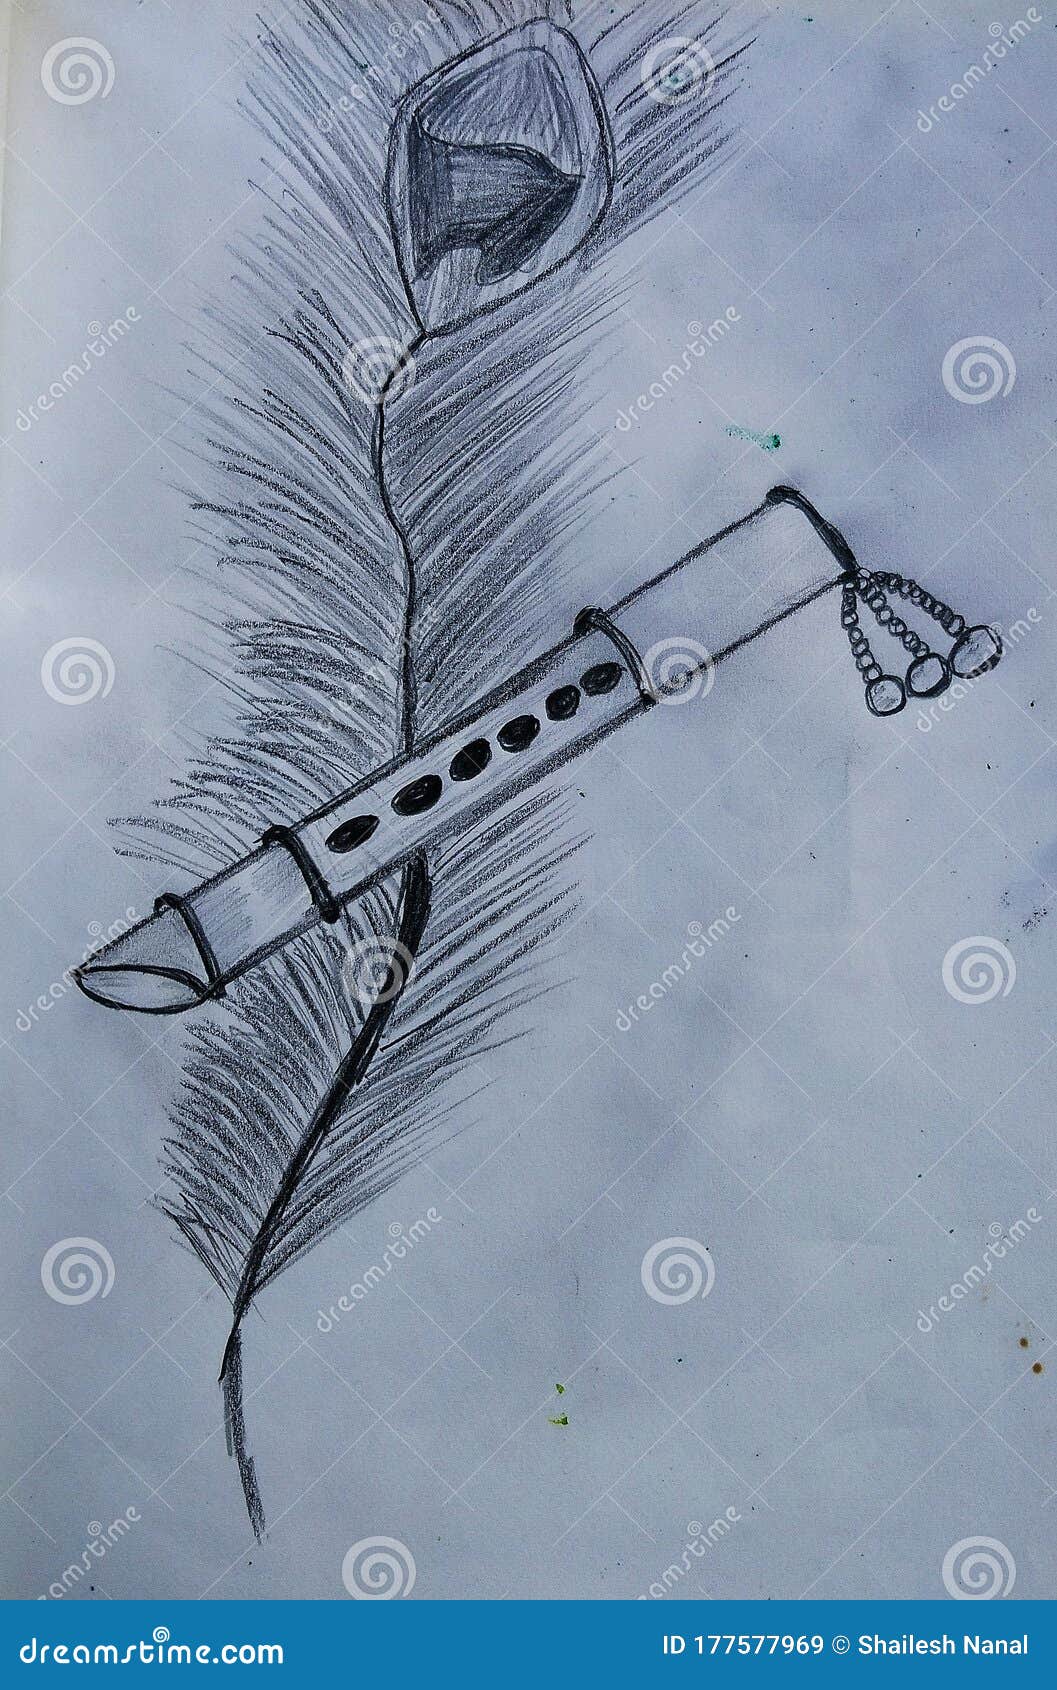 7517 Flute Drawing Images Stock Photos  Vectors  Shutterstock